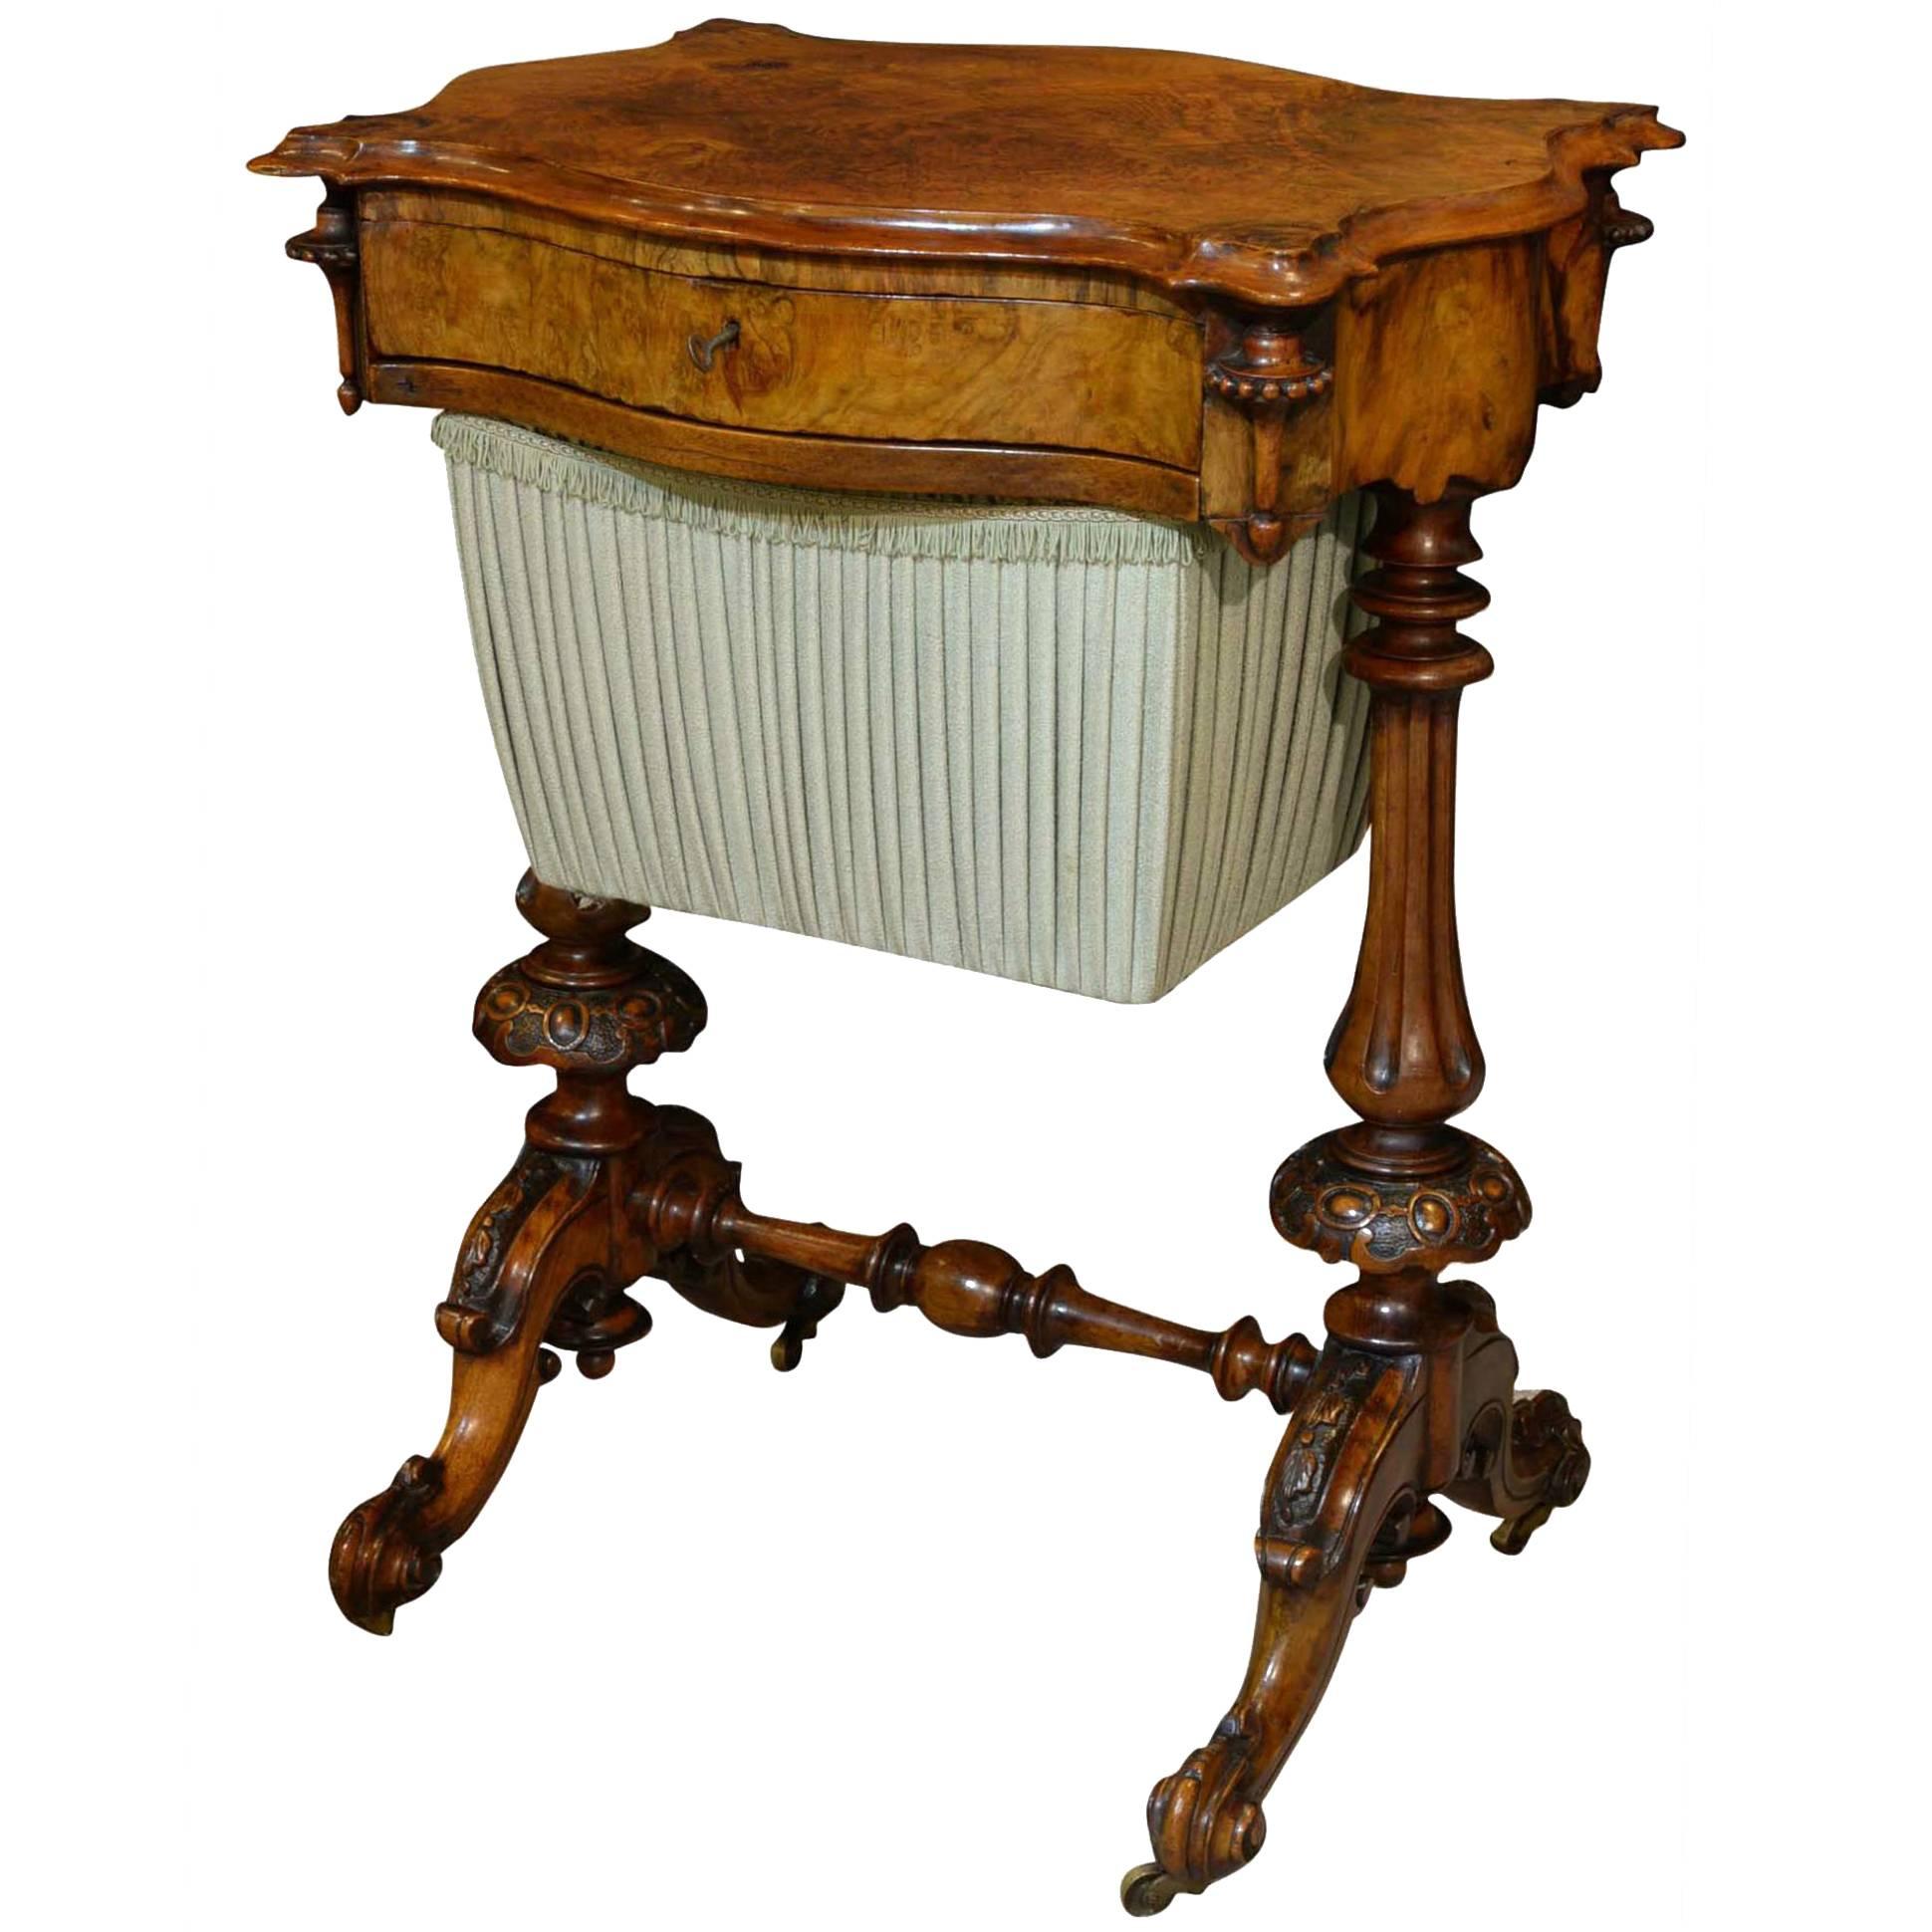 Decorative High Victorian Sewing Table